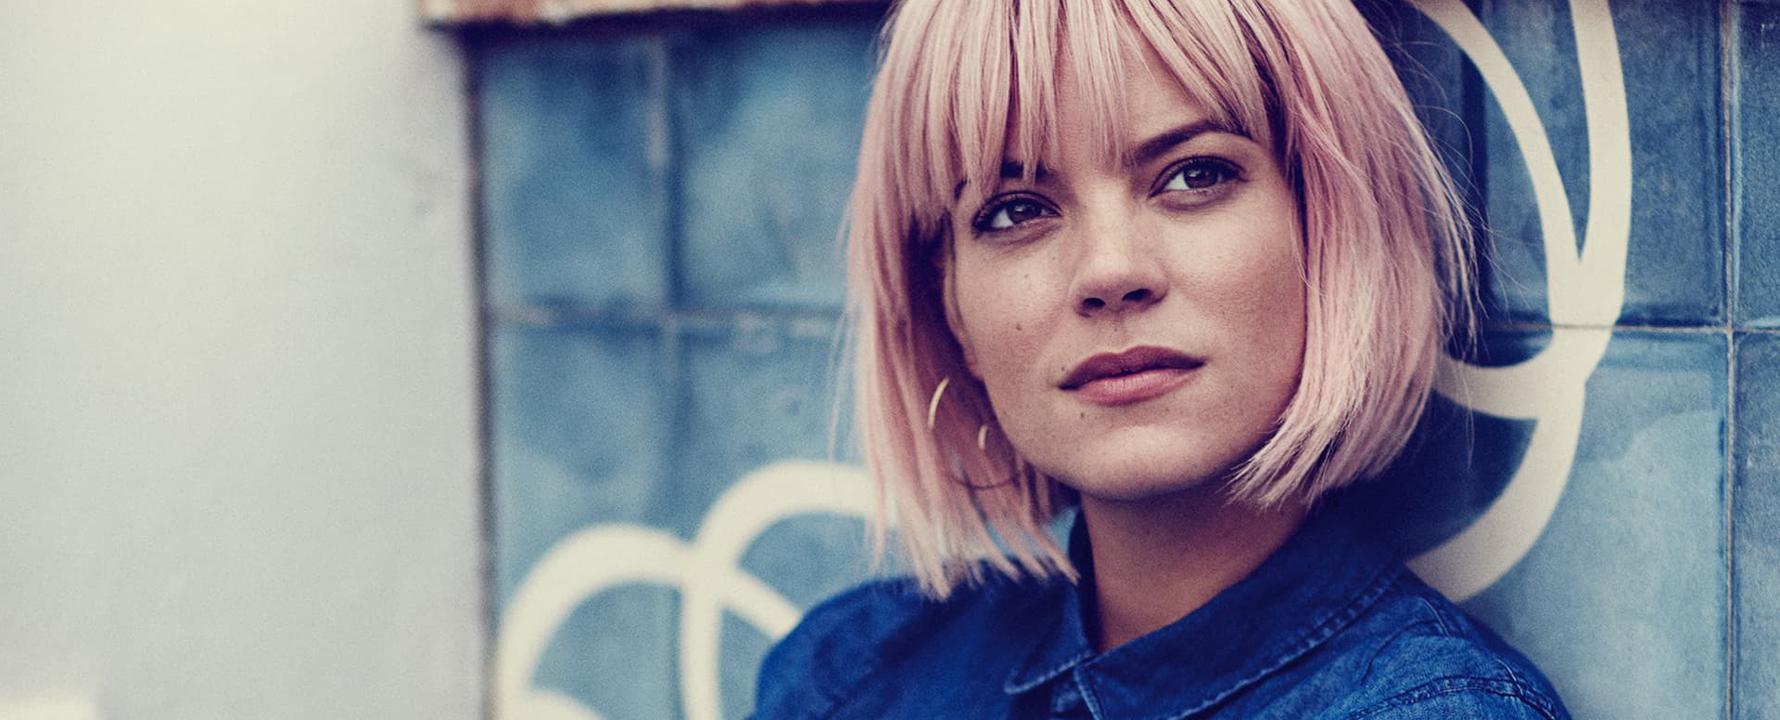 Promotional photograph of Lily Allen.